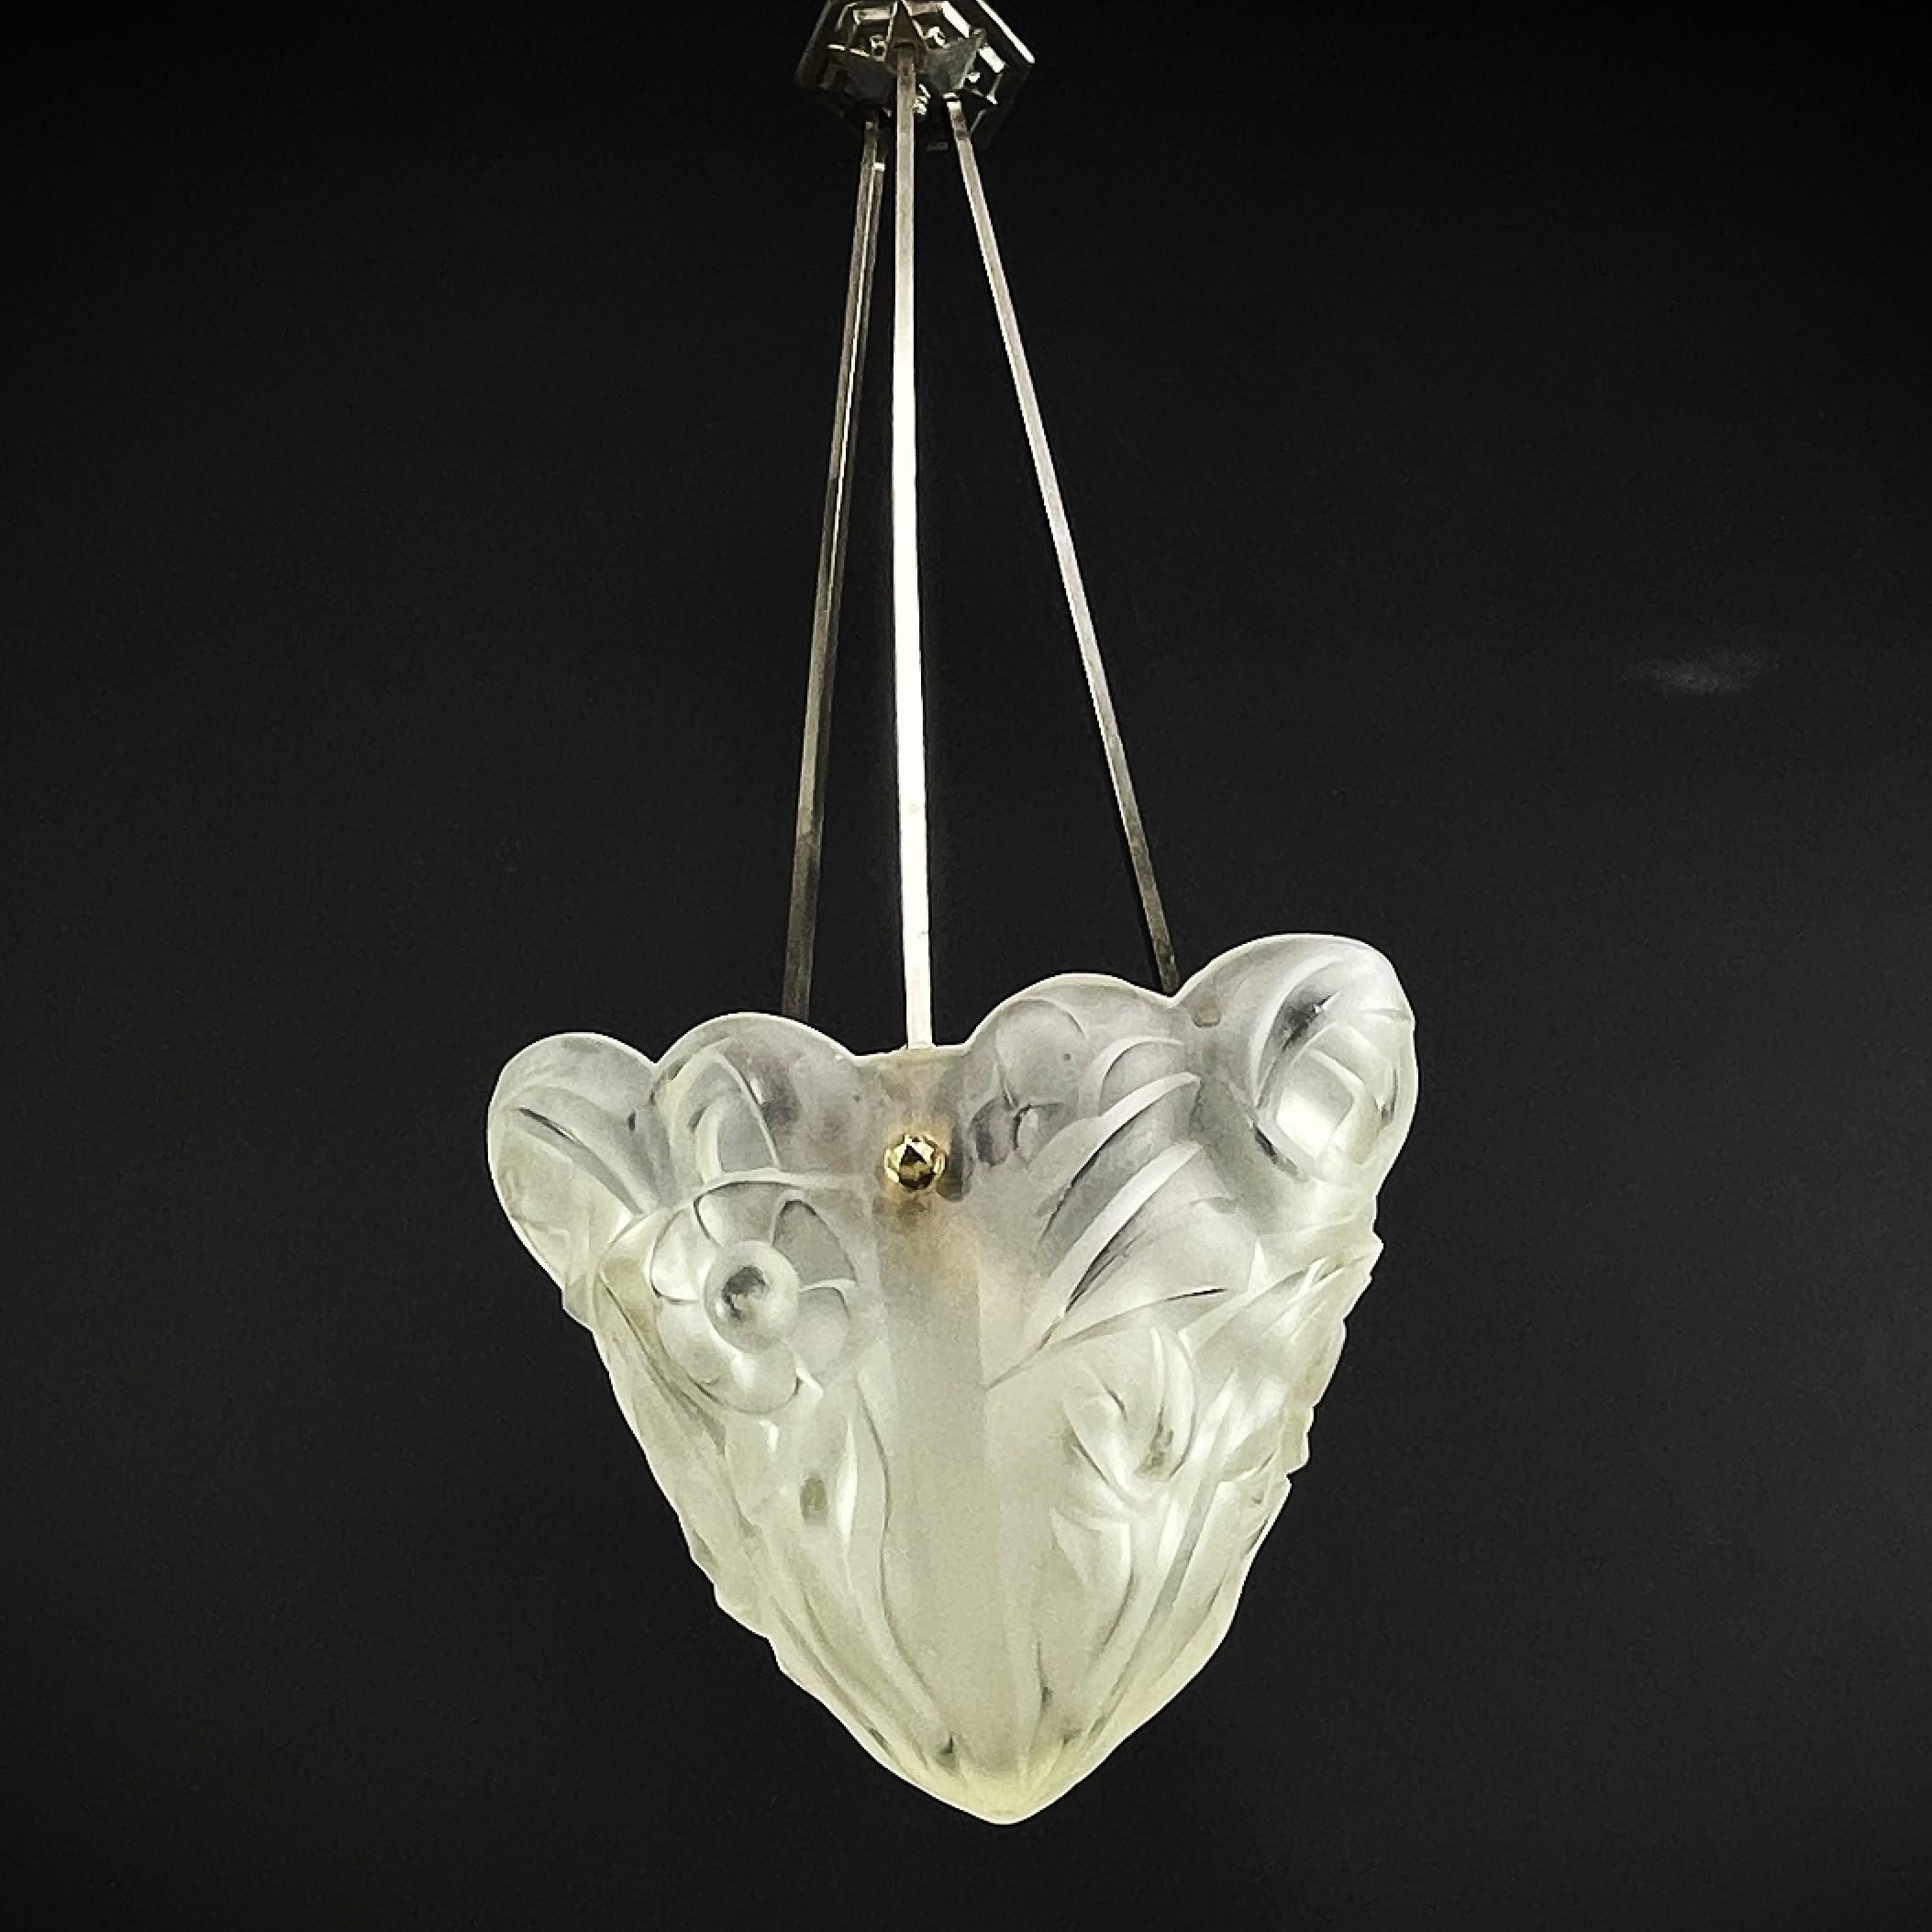 Art Deco Chandelier by Degué

This stunning 1930's signed Art Deco chandelier is an outstanding example of the elegance and sophistication of the Art Deco style. With its combination of chrome and glass, this chandelier embodies the glamour and